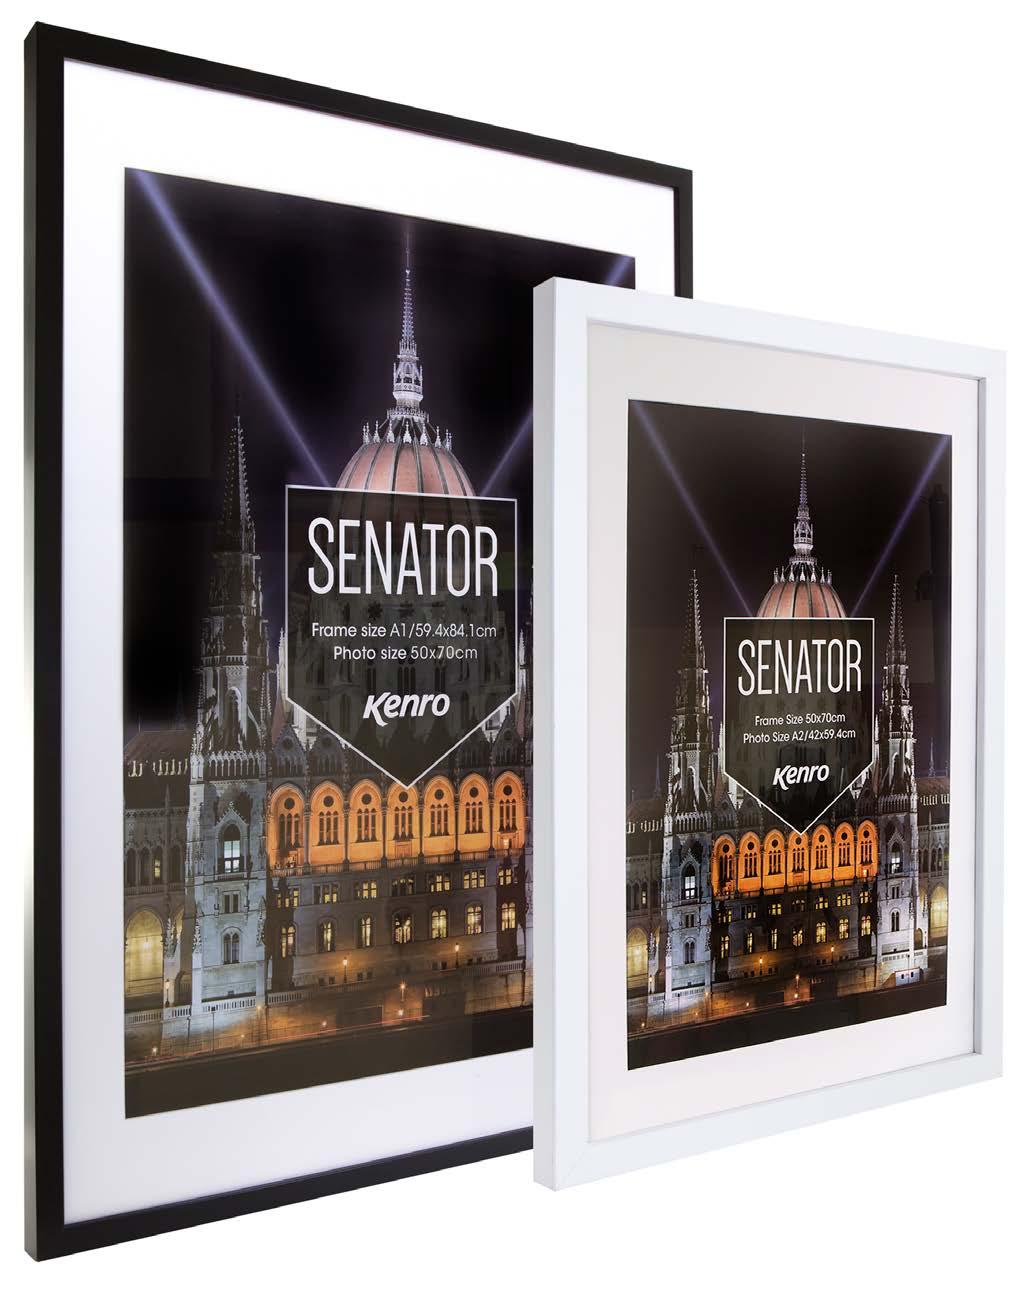 These are available in black or white with removable picture mats for sizes A2 and 50x70cm, and have acrylic fronts.